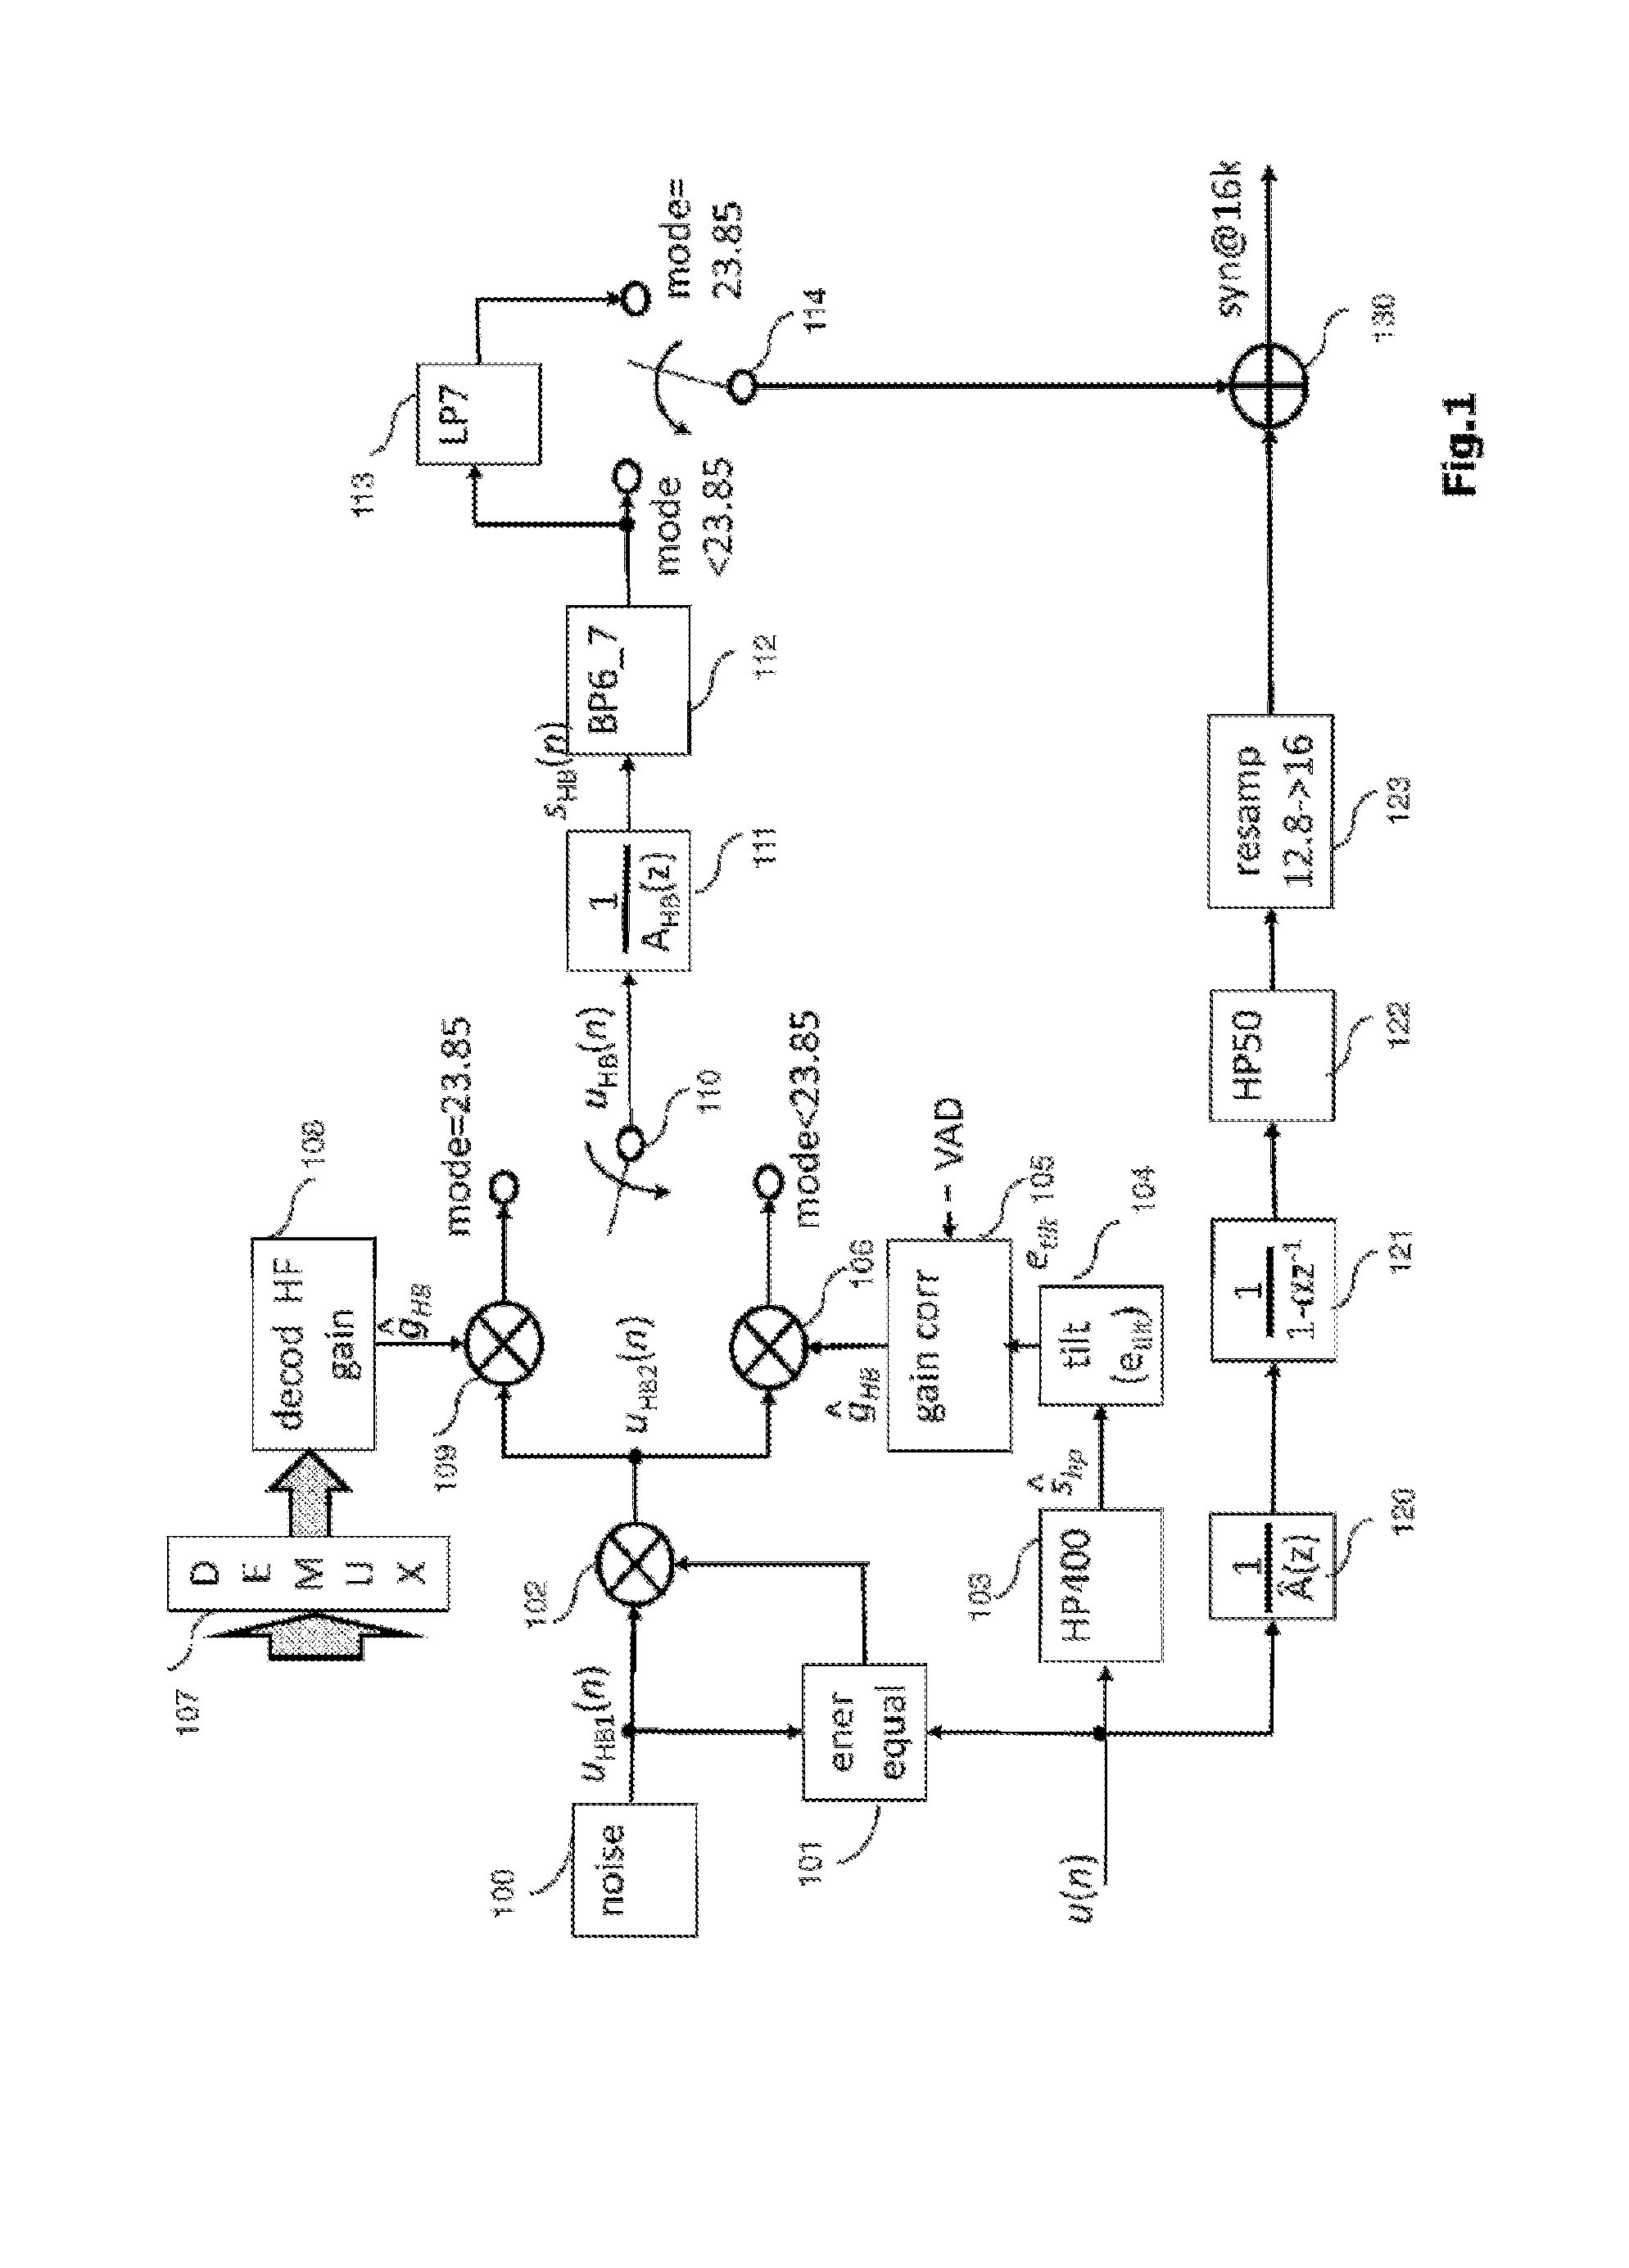 Optimized scale factor for frequency band extension in an audio frequency signal decoder